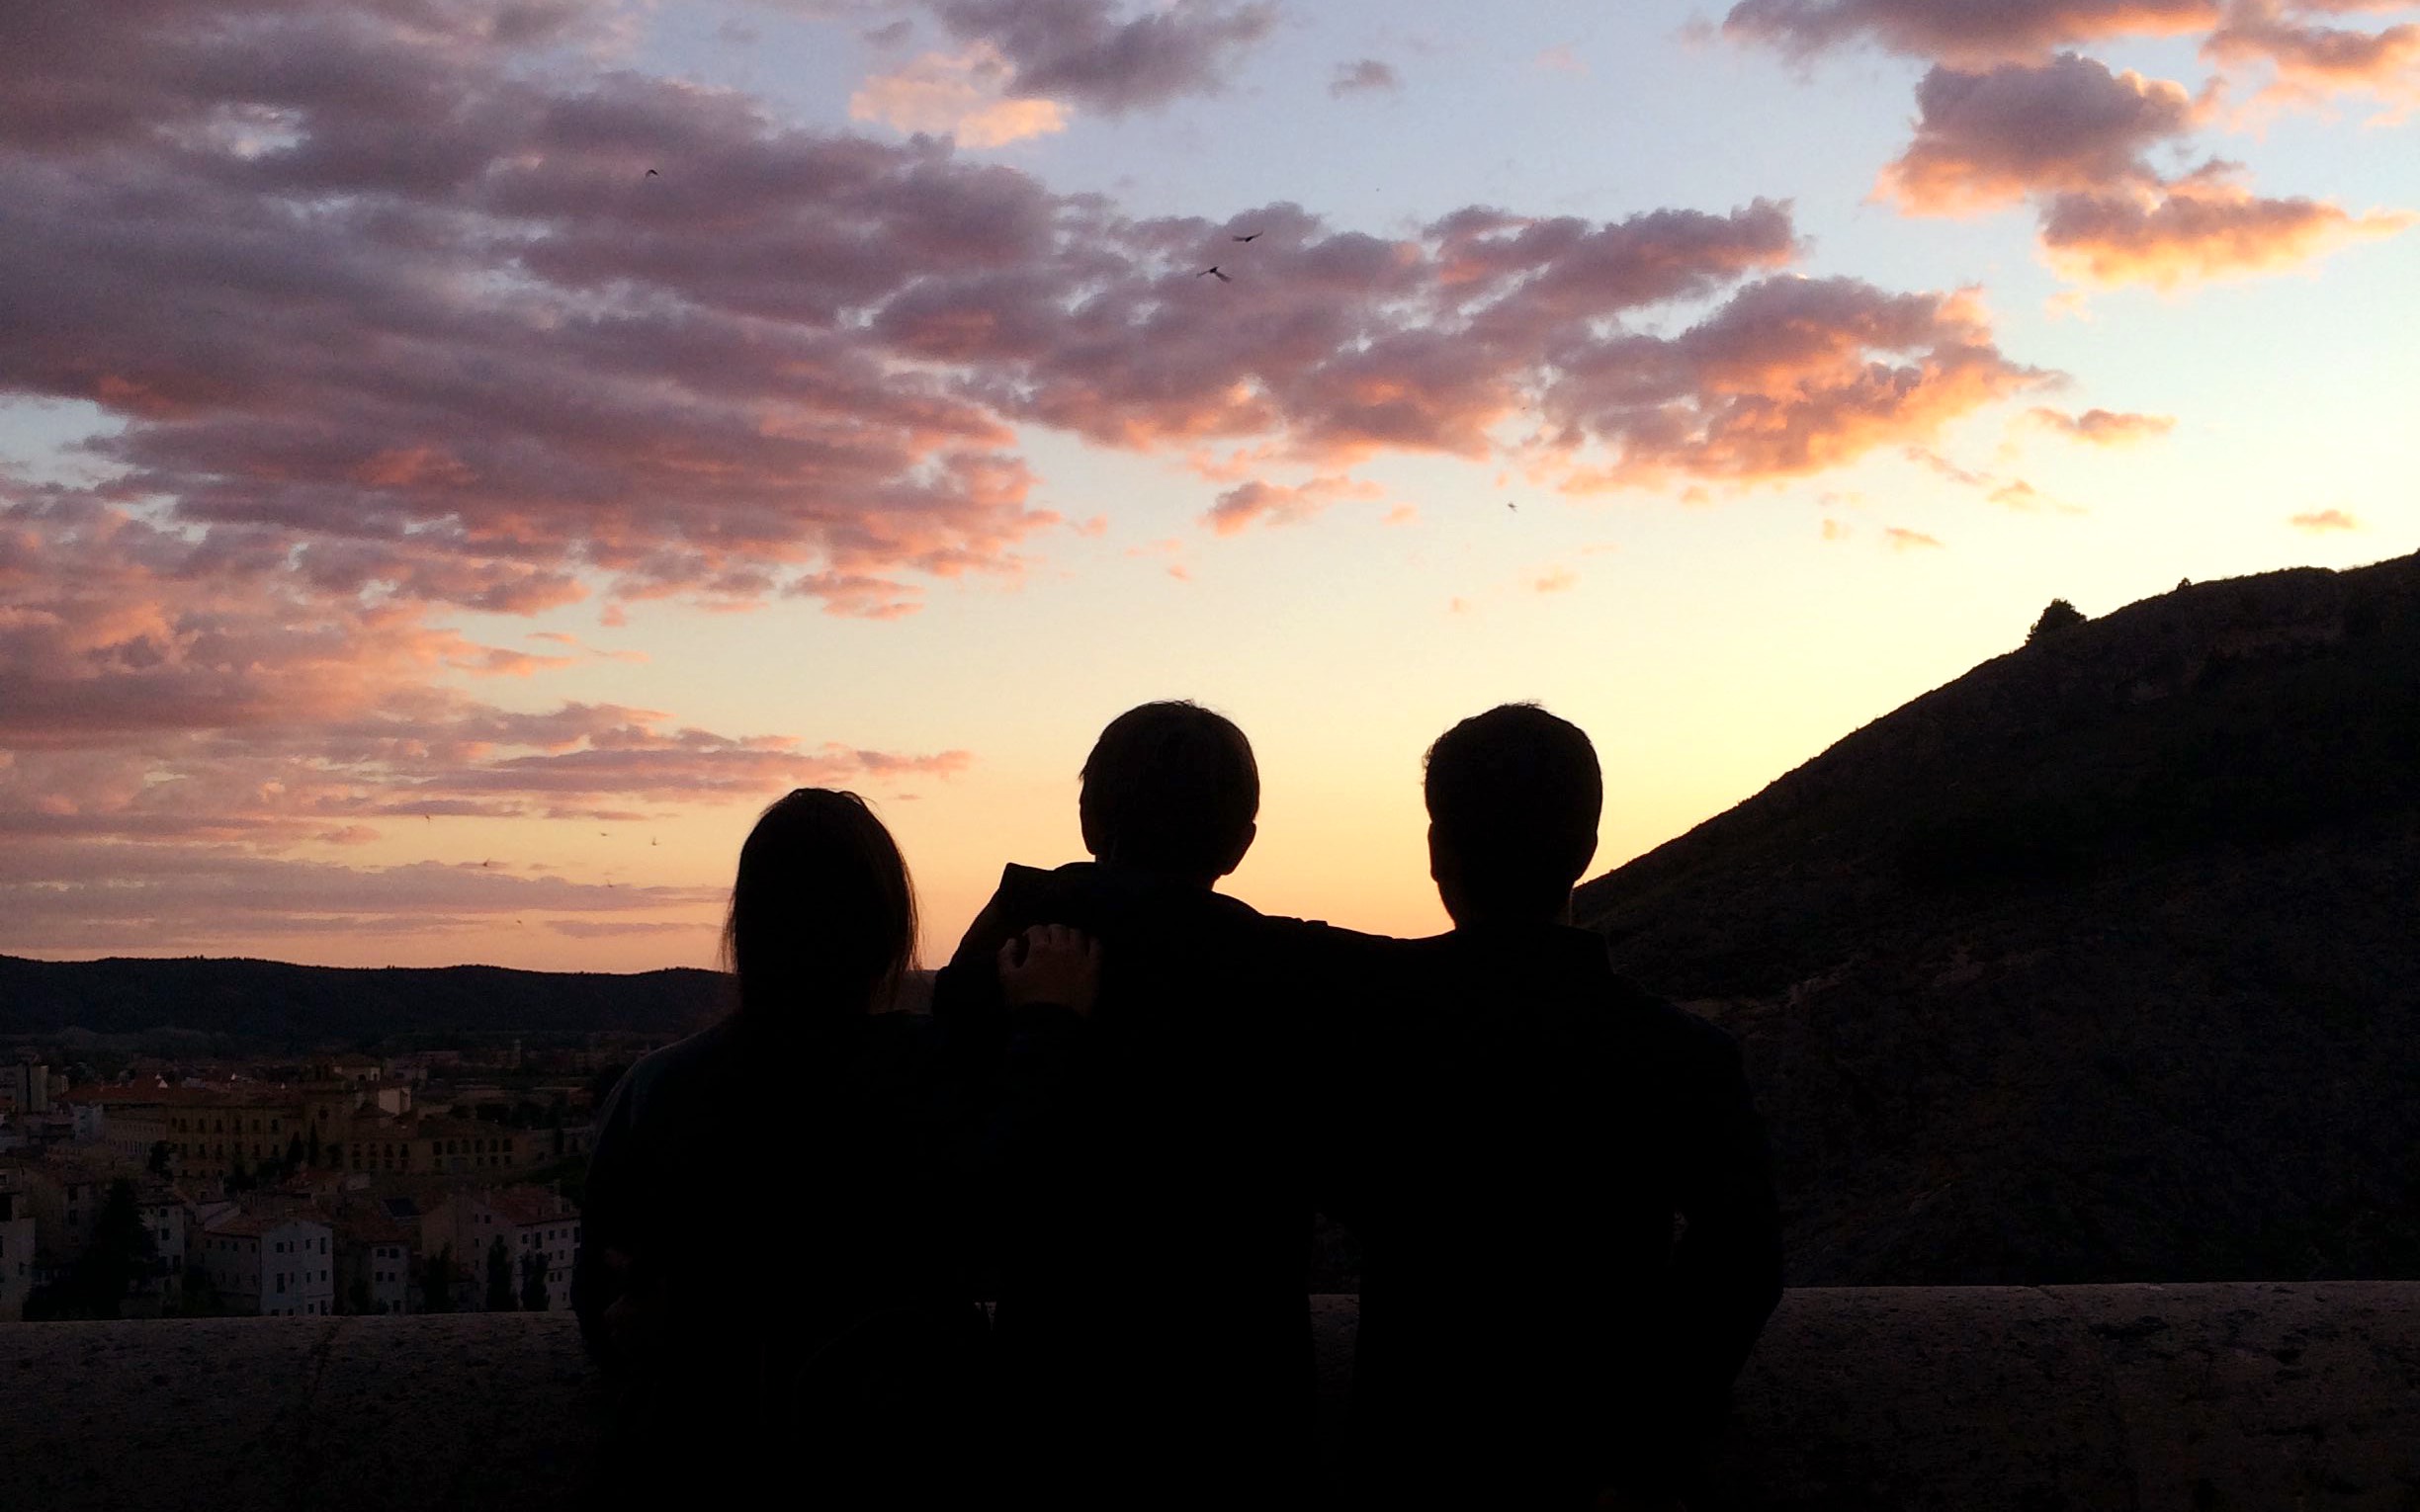 Three silhouettes standing on a balcony looking at the sunset in Cuenca, Spain.